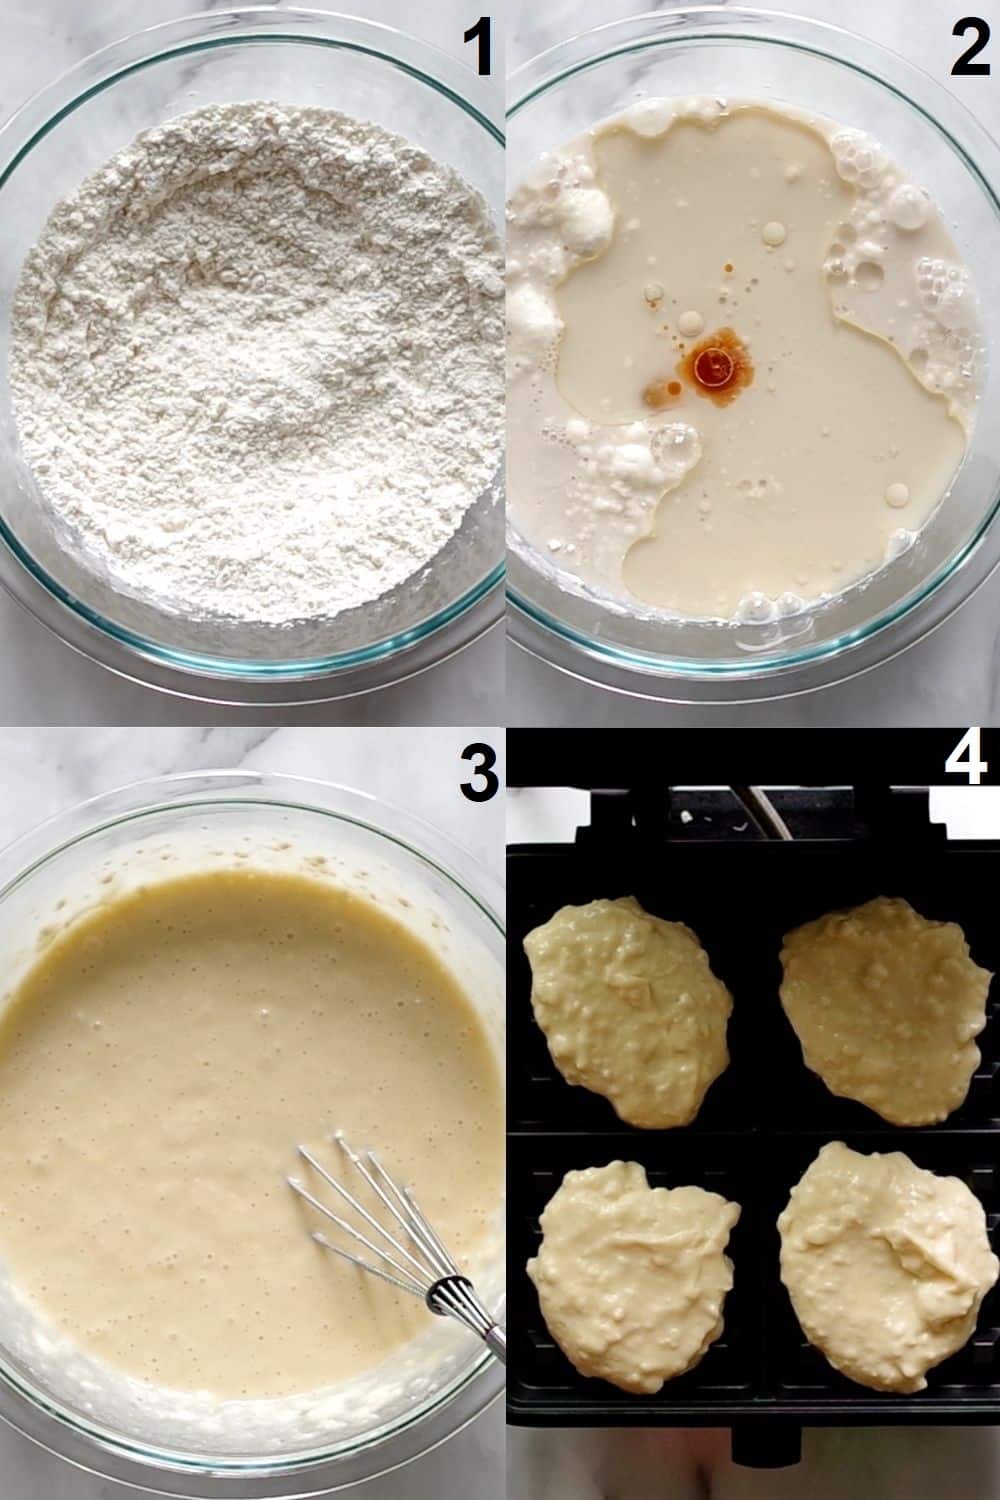 4 photos showing the steps to make gluten free waffles